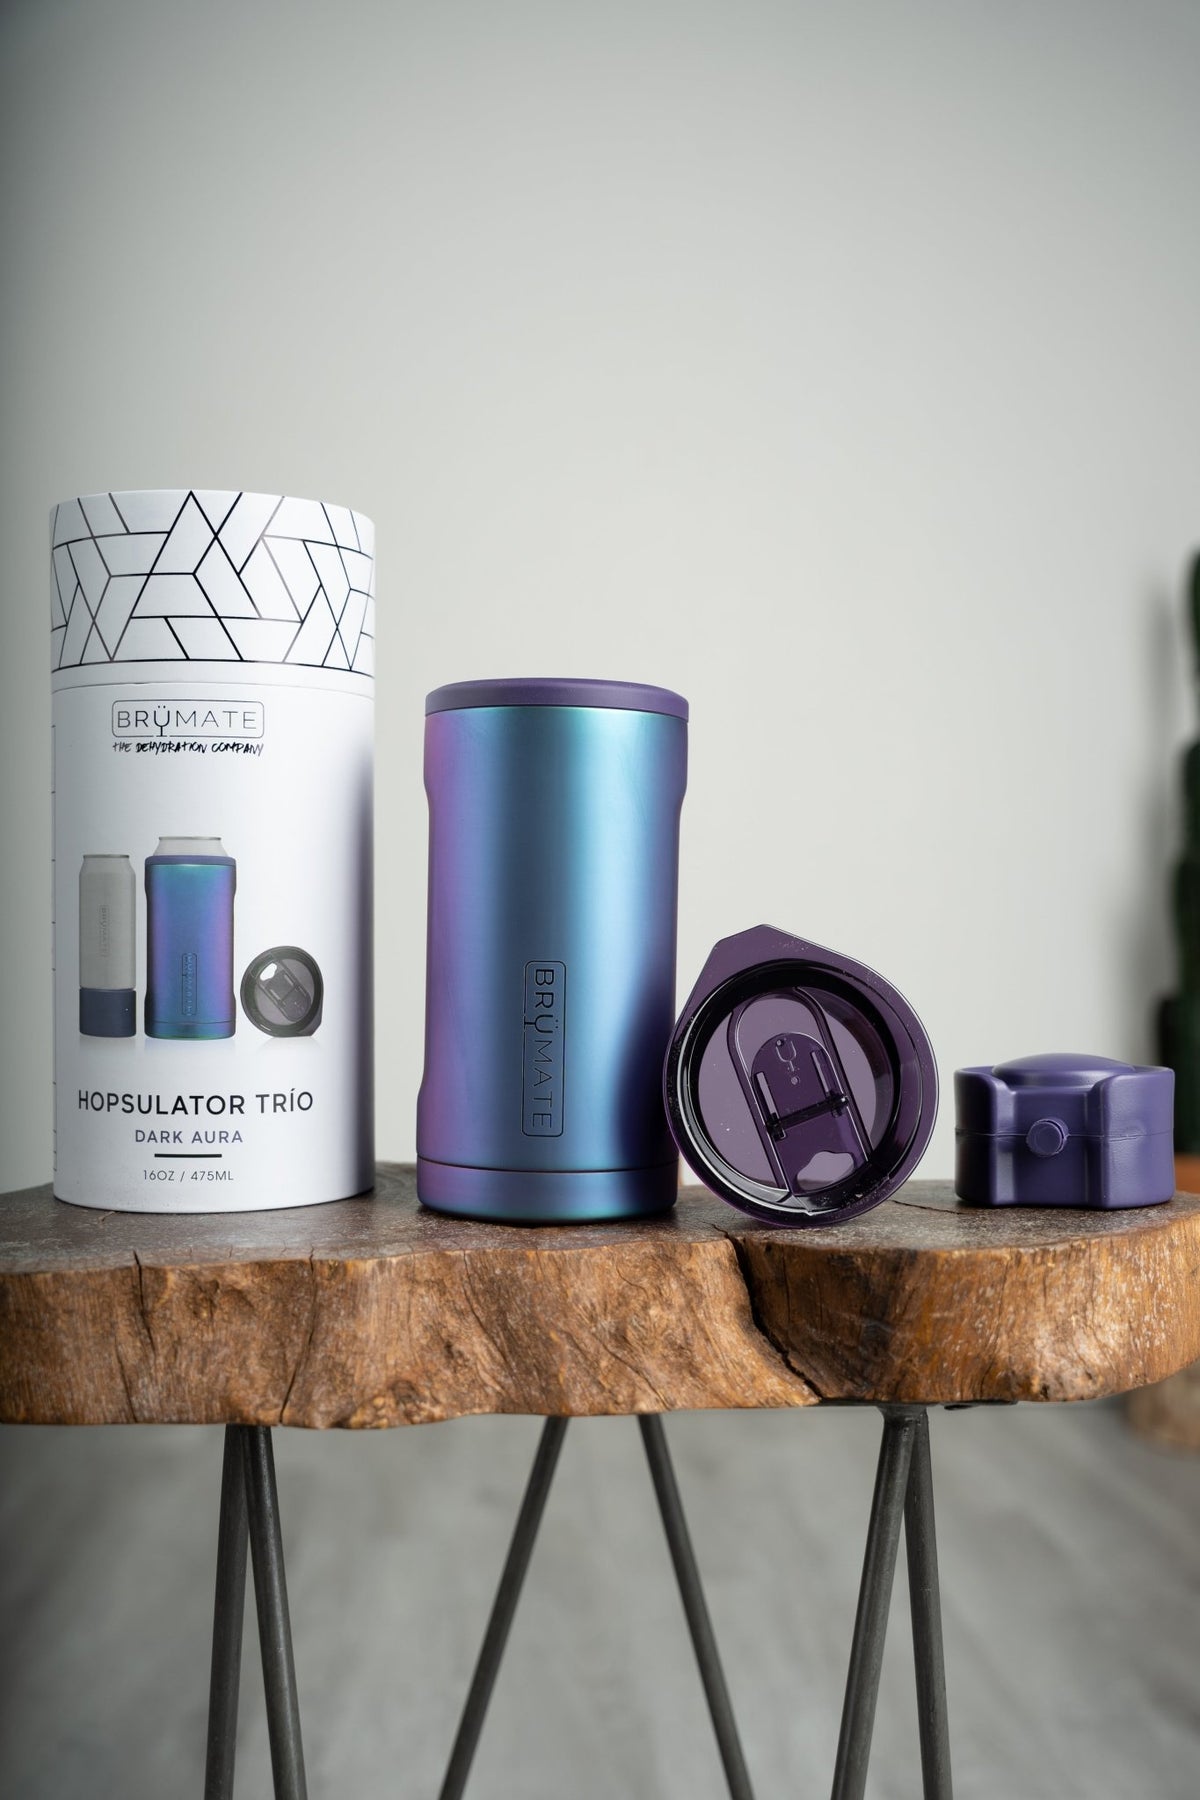 BruMate hopsulator trio 3 in1 dark aura - BruMate Drinkware, Tumblers and Insulated Can Coolers at Lush Fashion Lounge Trendy Boutique in Oklahoma City